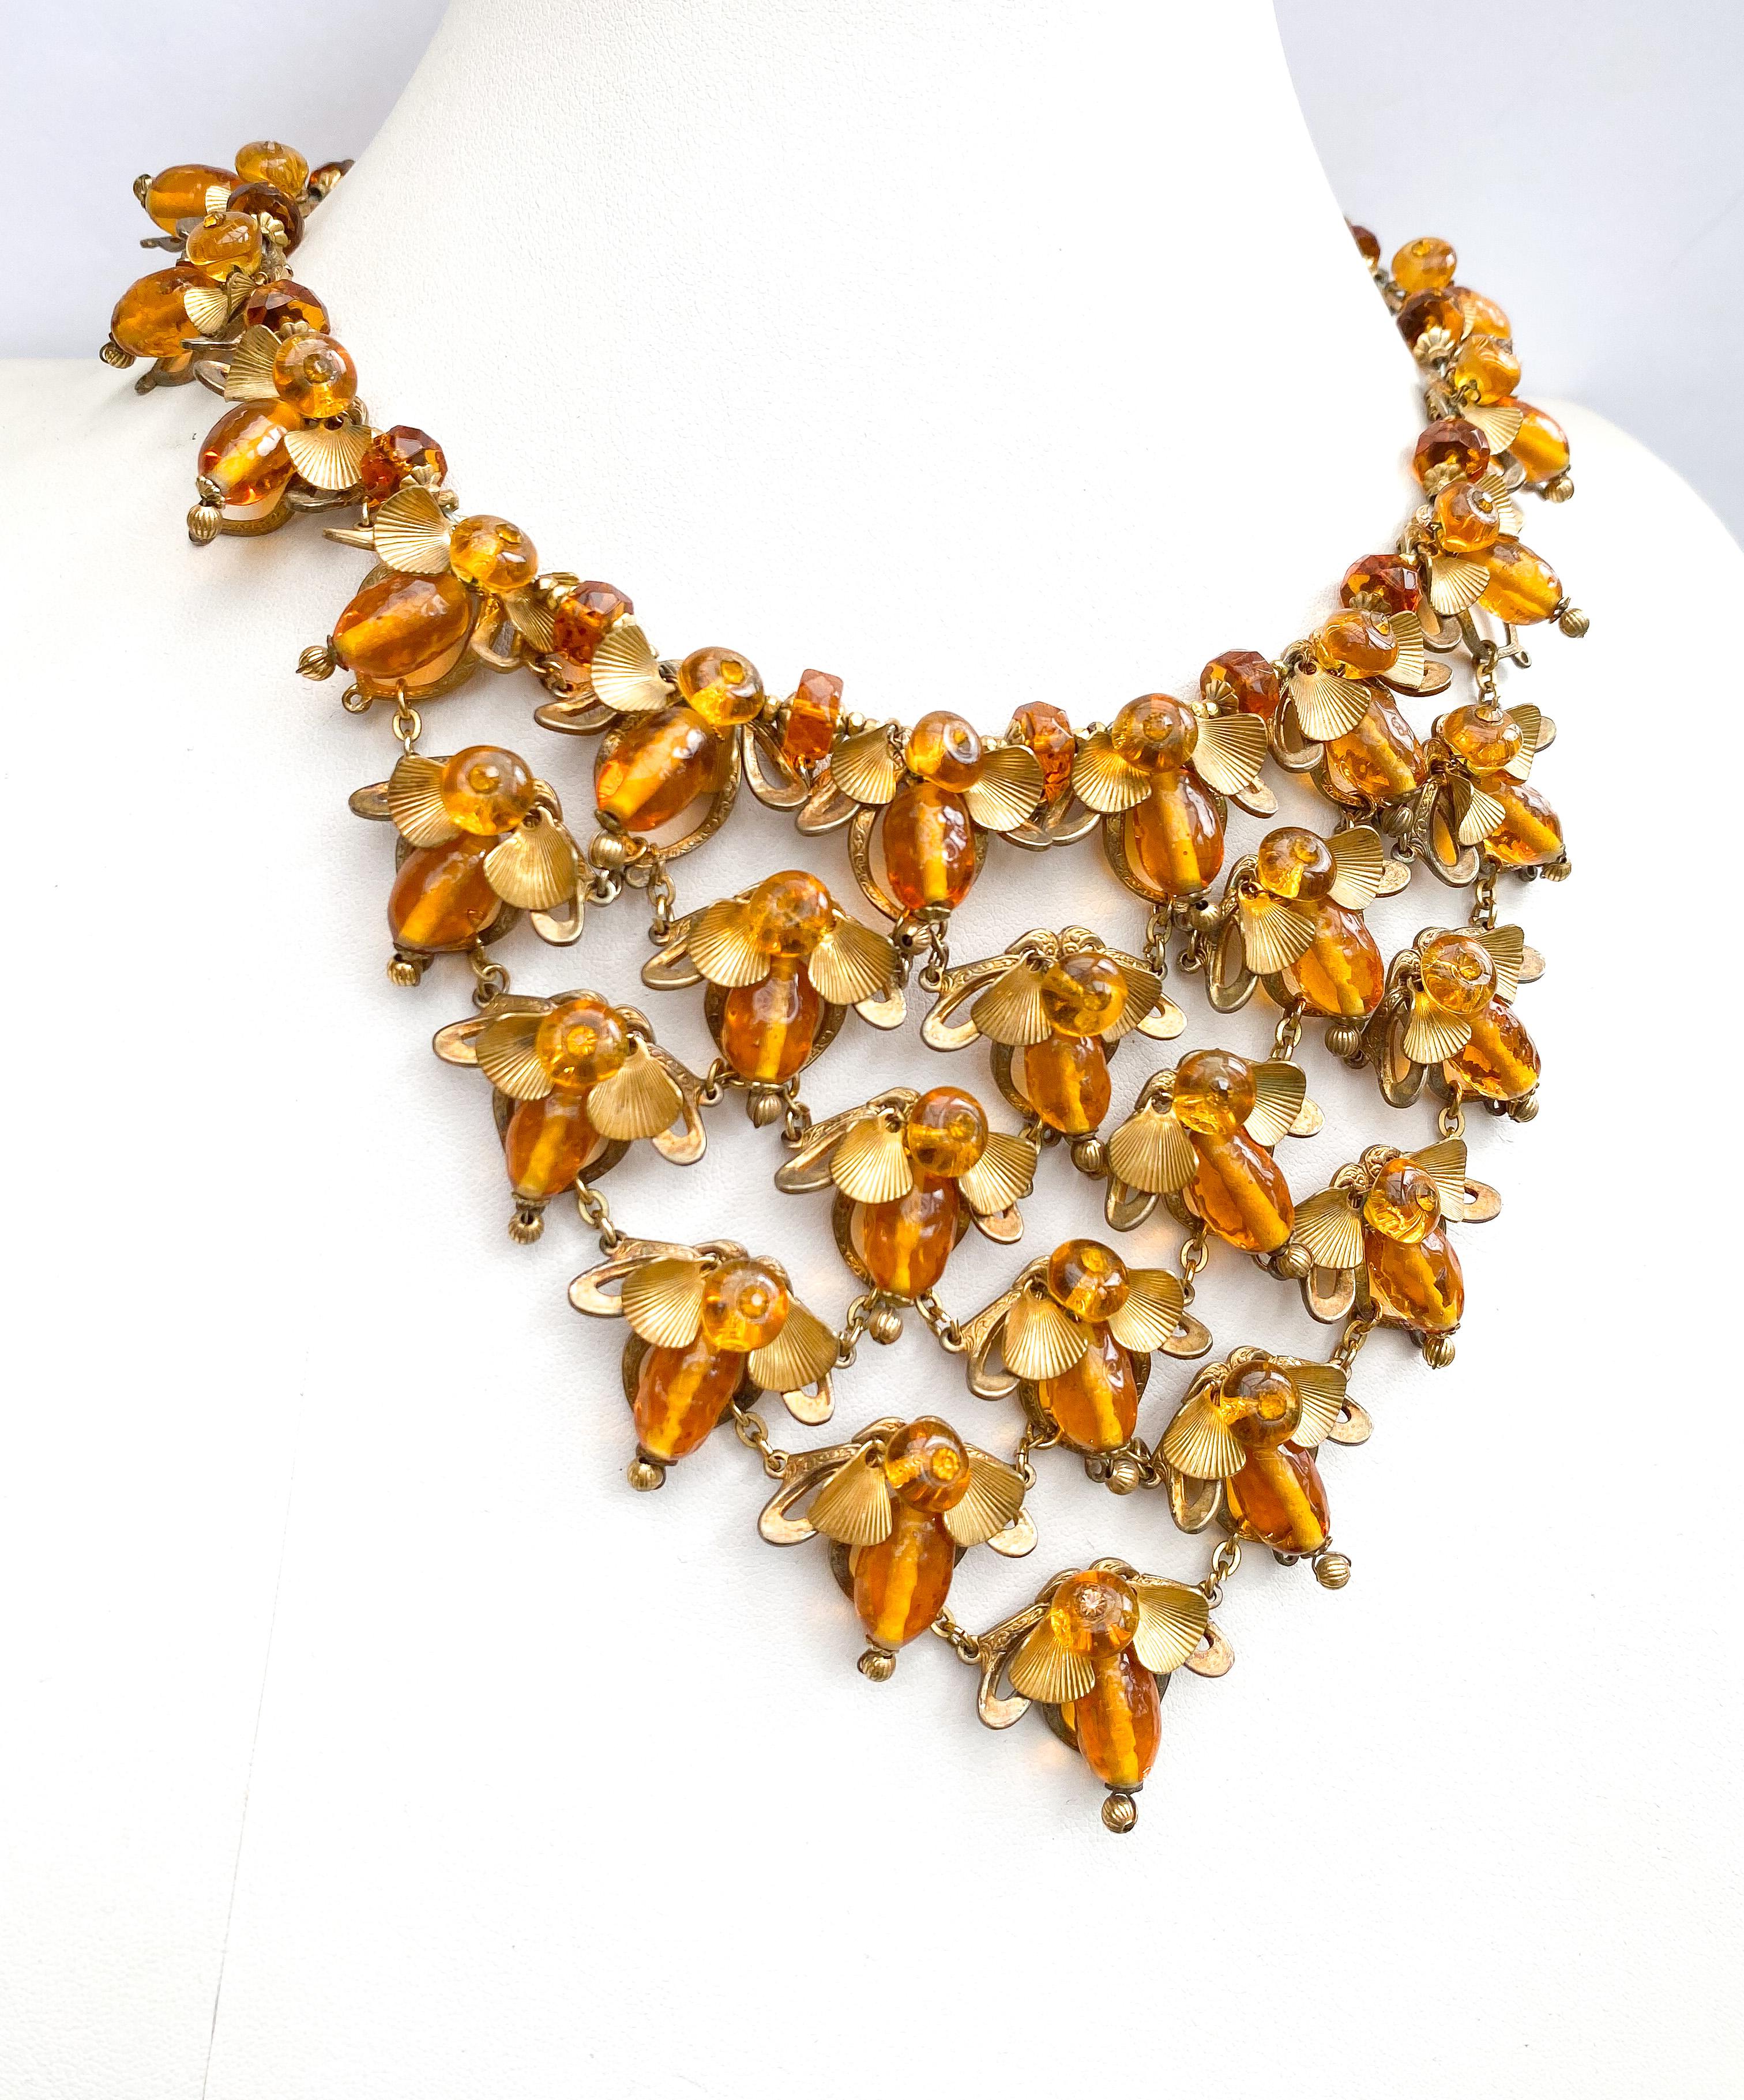 A magnificent topaz glass bead necklace, with 'bee' motif, Miriam Haskell, c1965 For Sale 6